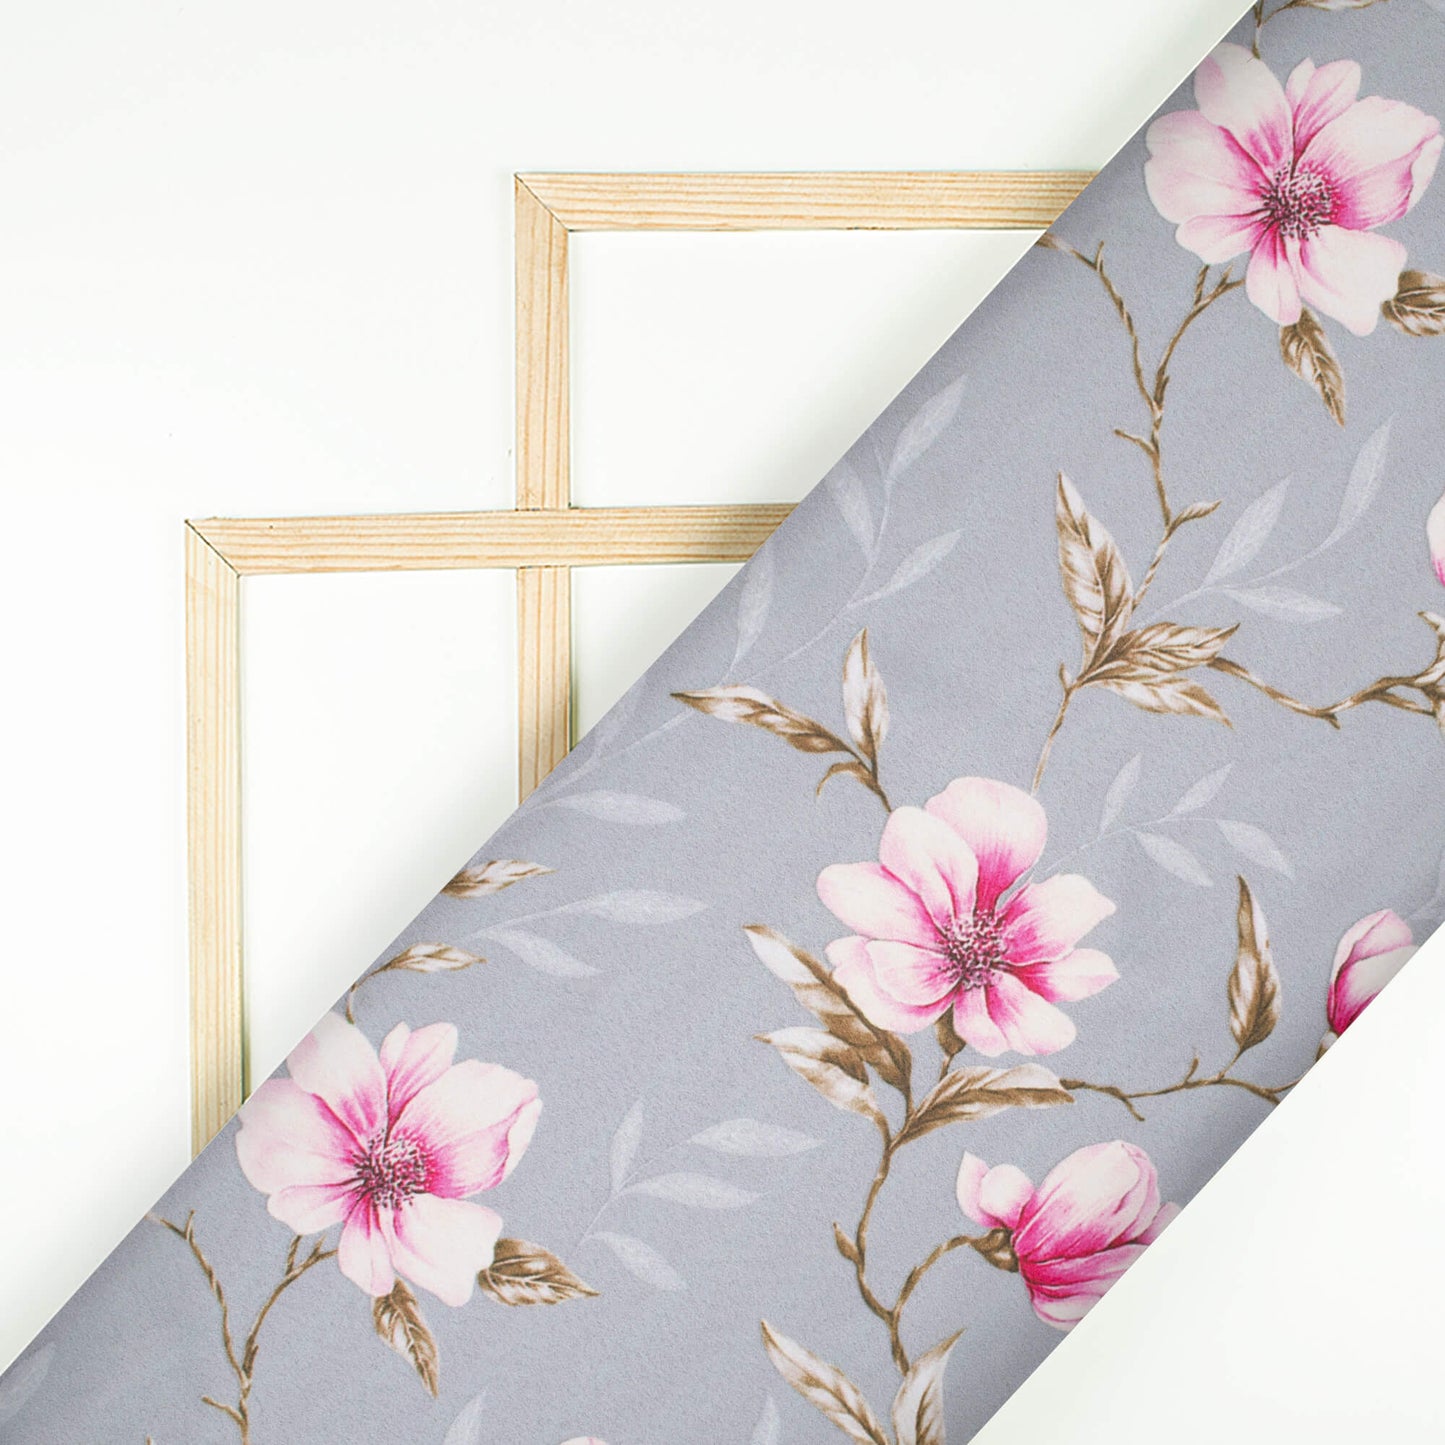 Dolphin Grey And Lemonde  Pink floral Pattern Digital Print Charmeuse Satin Fabric (Width 58 Inches)